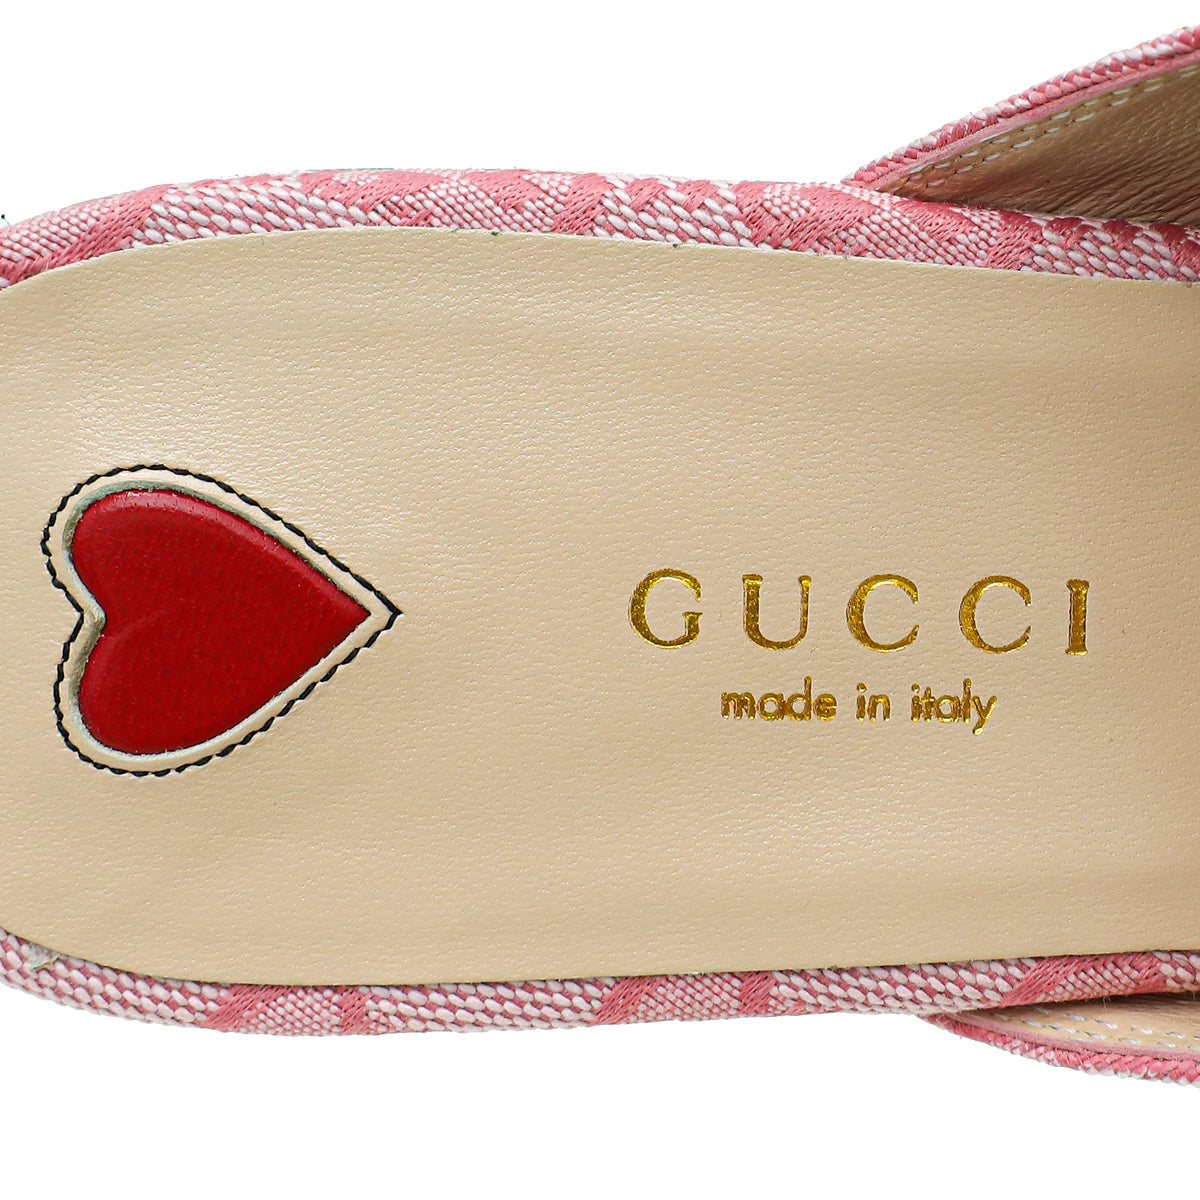 Gucci Pink GG Princetown Mules 37.5